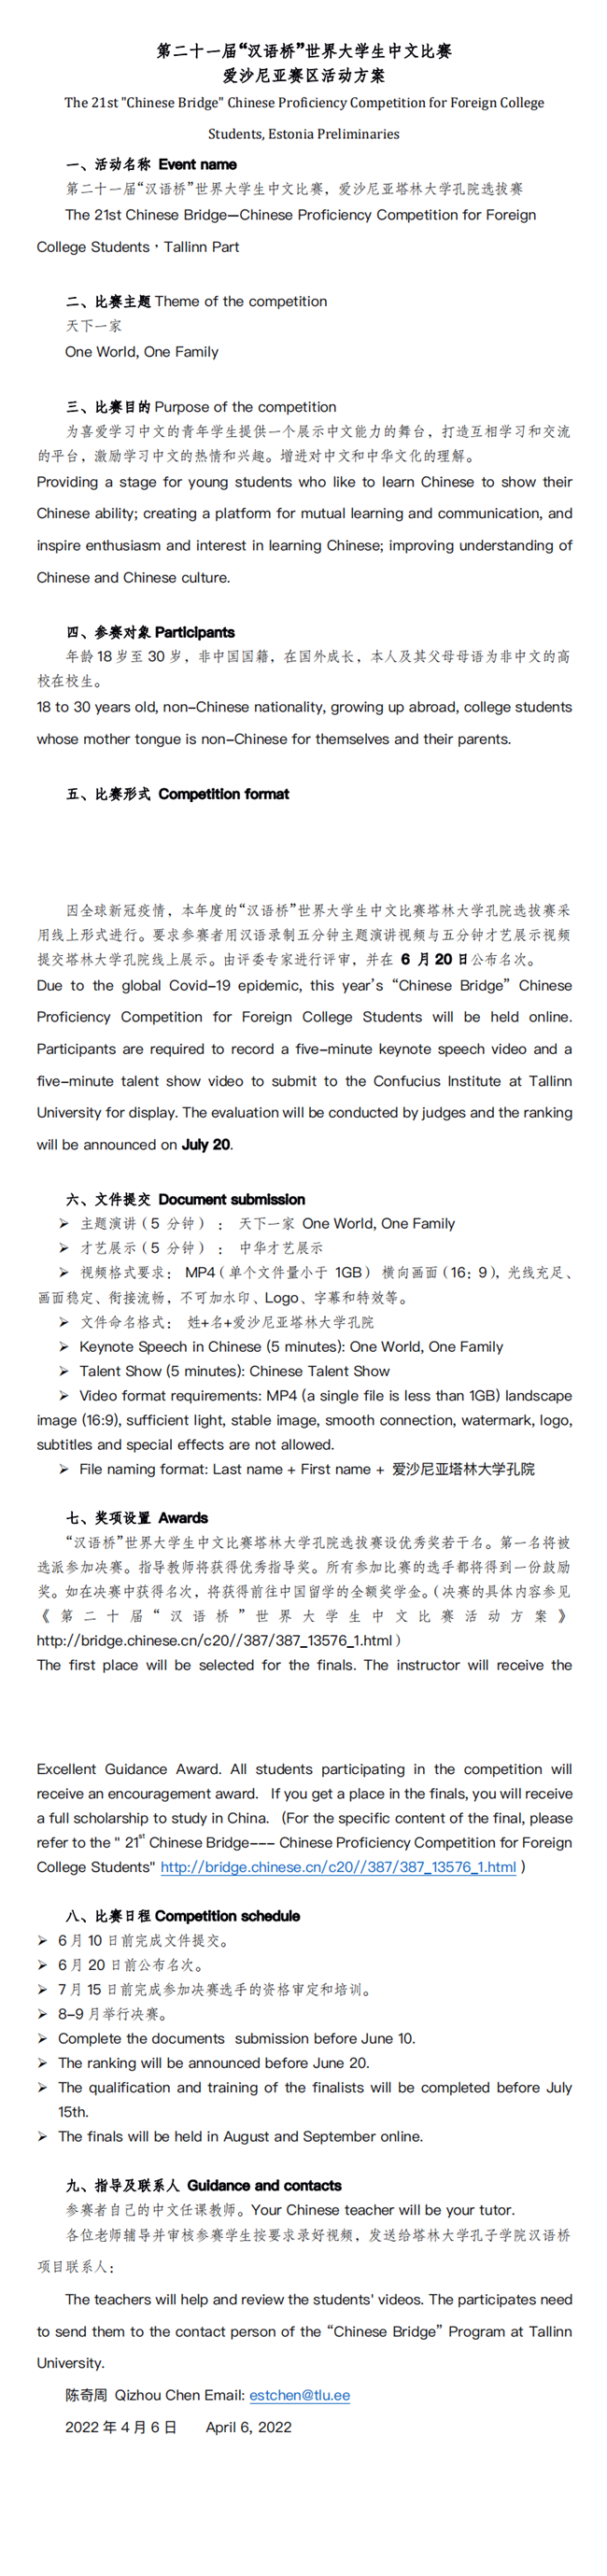 The 21st Chinese Bridge Chinese Proficiency Competition for Foreign College Studnets 第二十一届“汉语桥”世界大学生中文比赛爱沙尼亚赛区活动方案_0.png